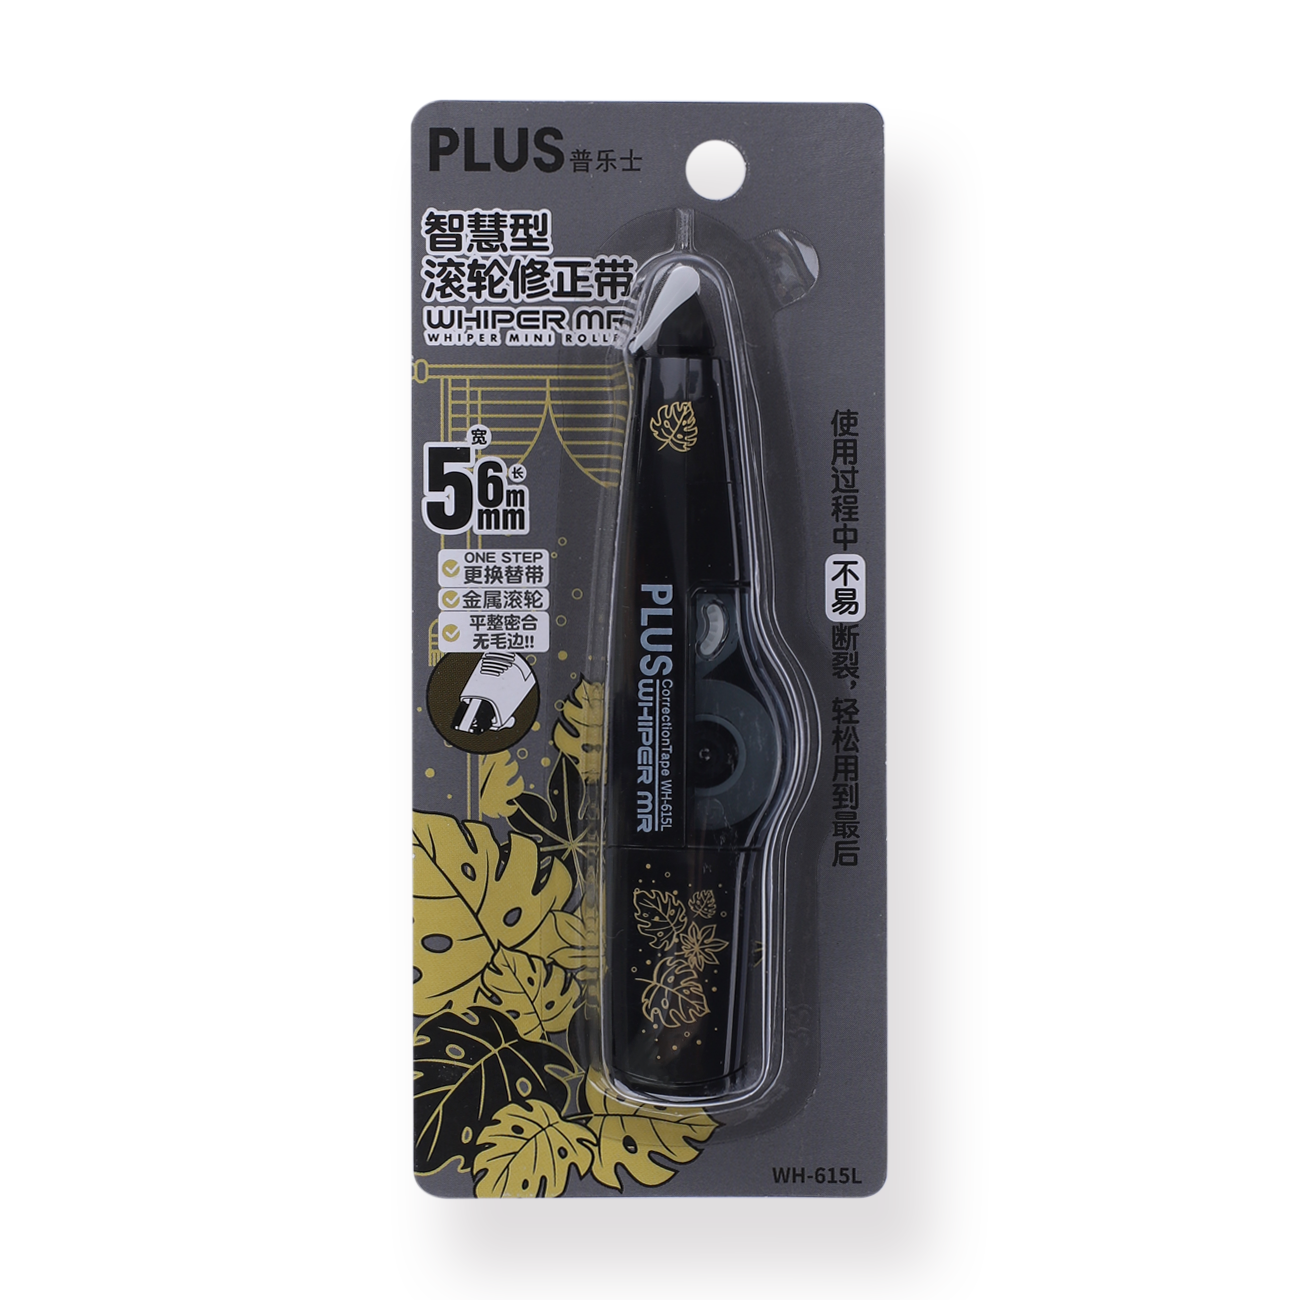 Plus Whiper Mr Limited Edition Correction Tape - Black Gold Series - Leaves - Stationery Pal